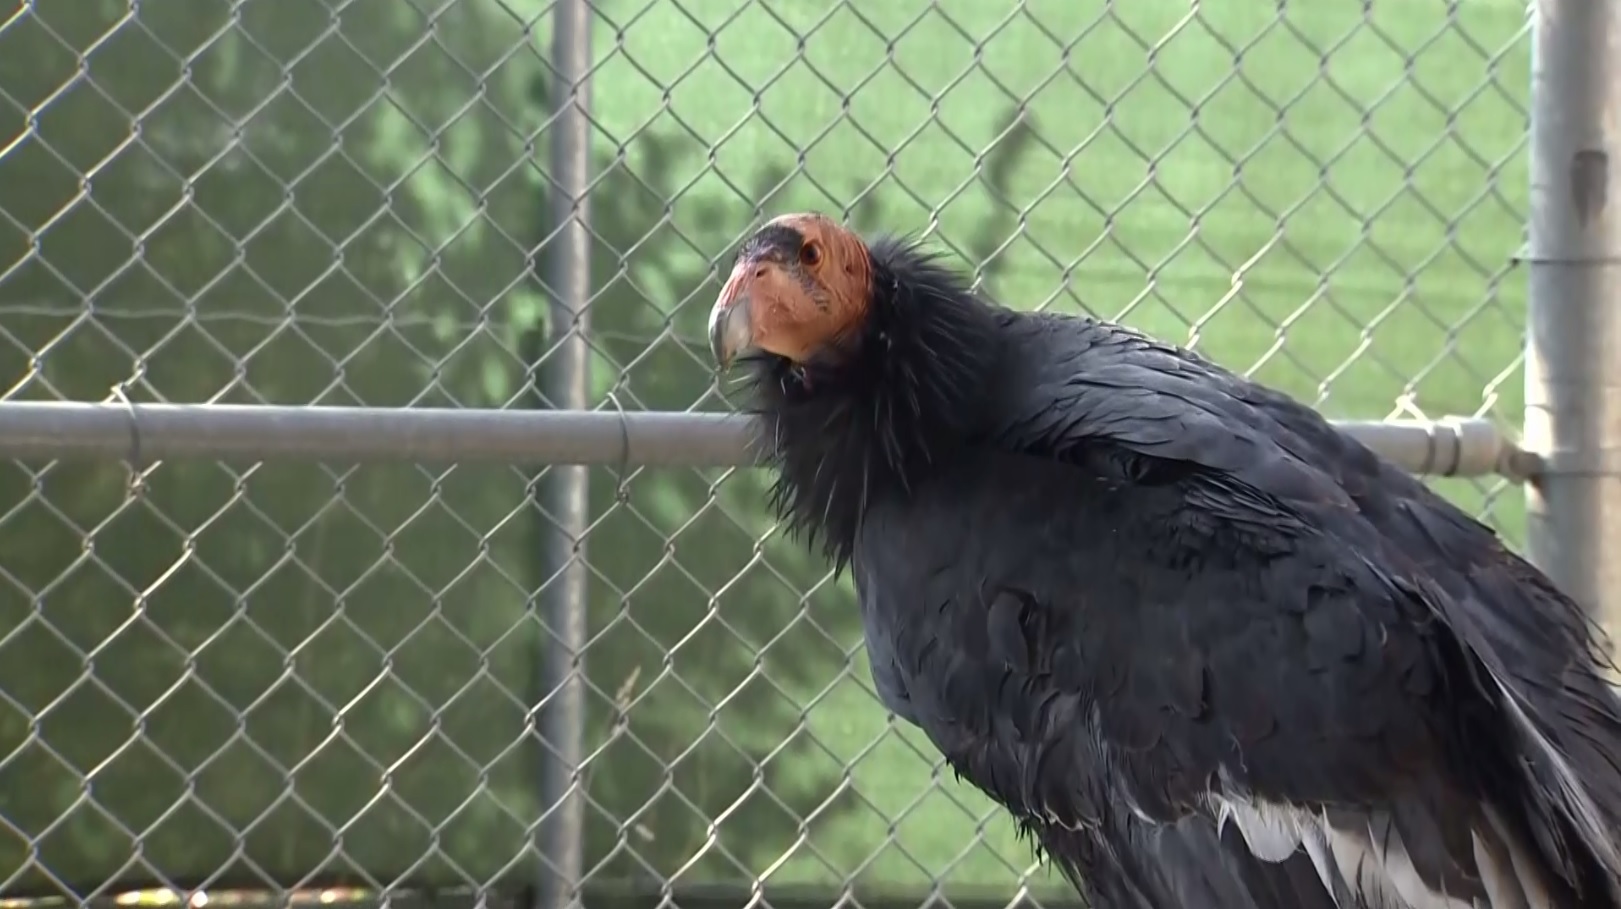 An endangered California condor being treated for lead poisoning at the Oakland Zoo, November 7, 2019. (CBS)